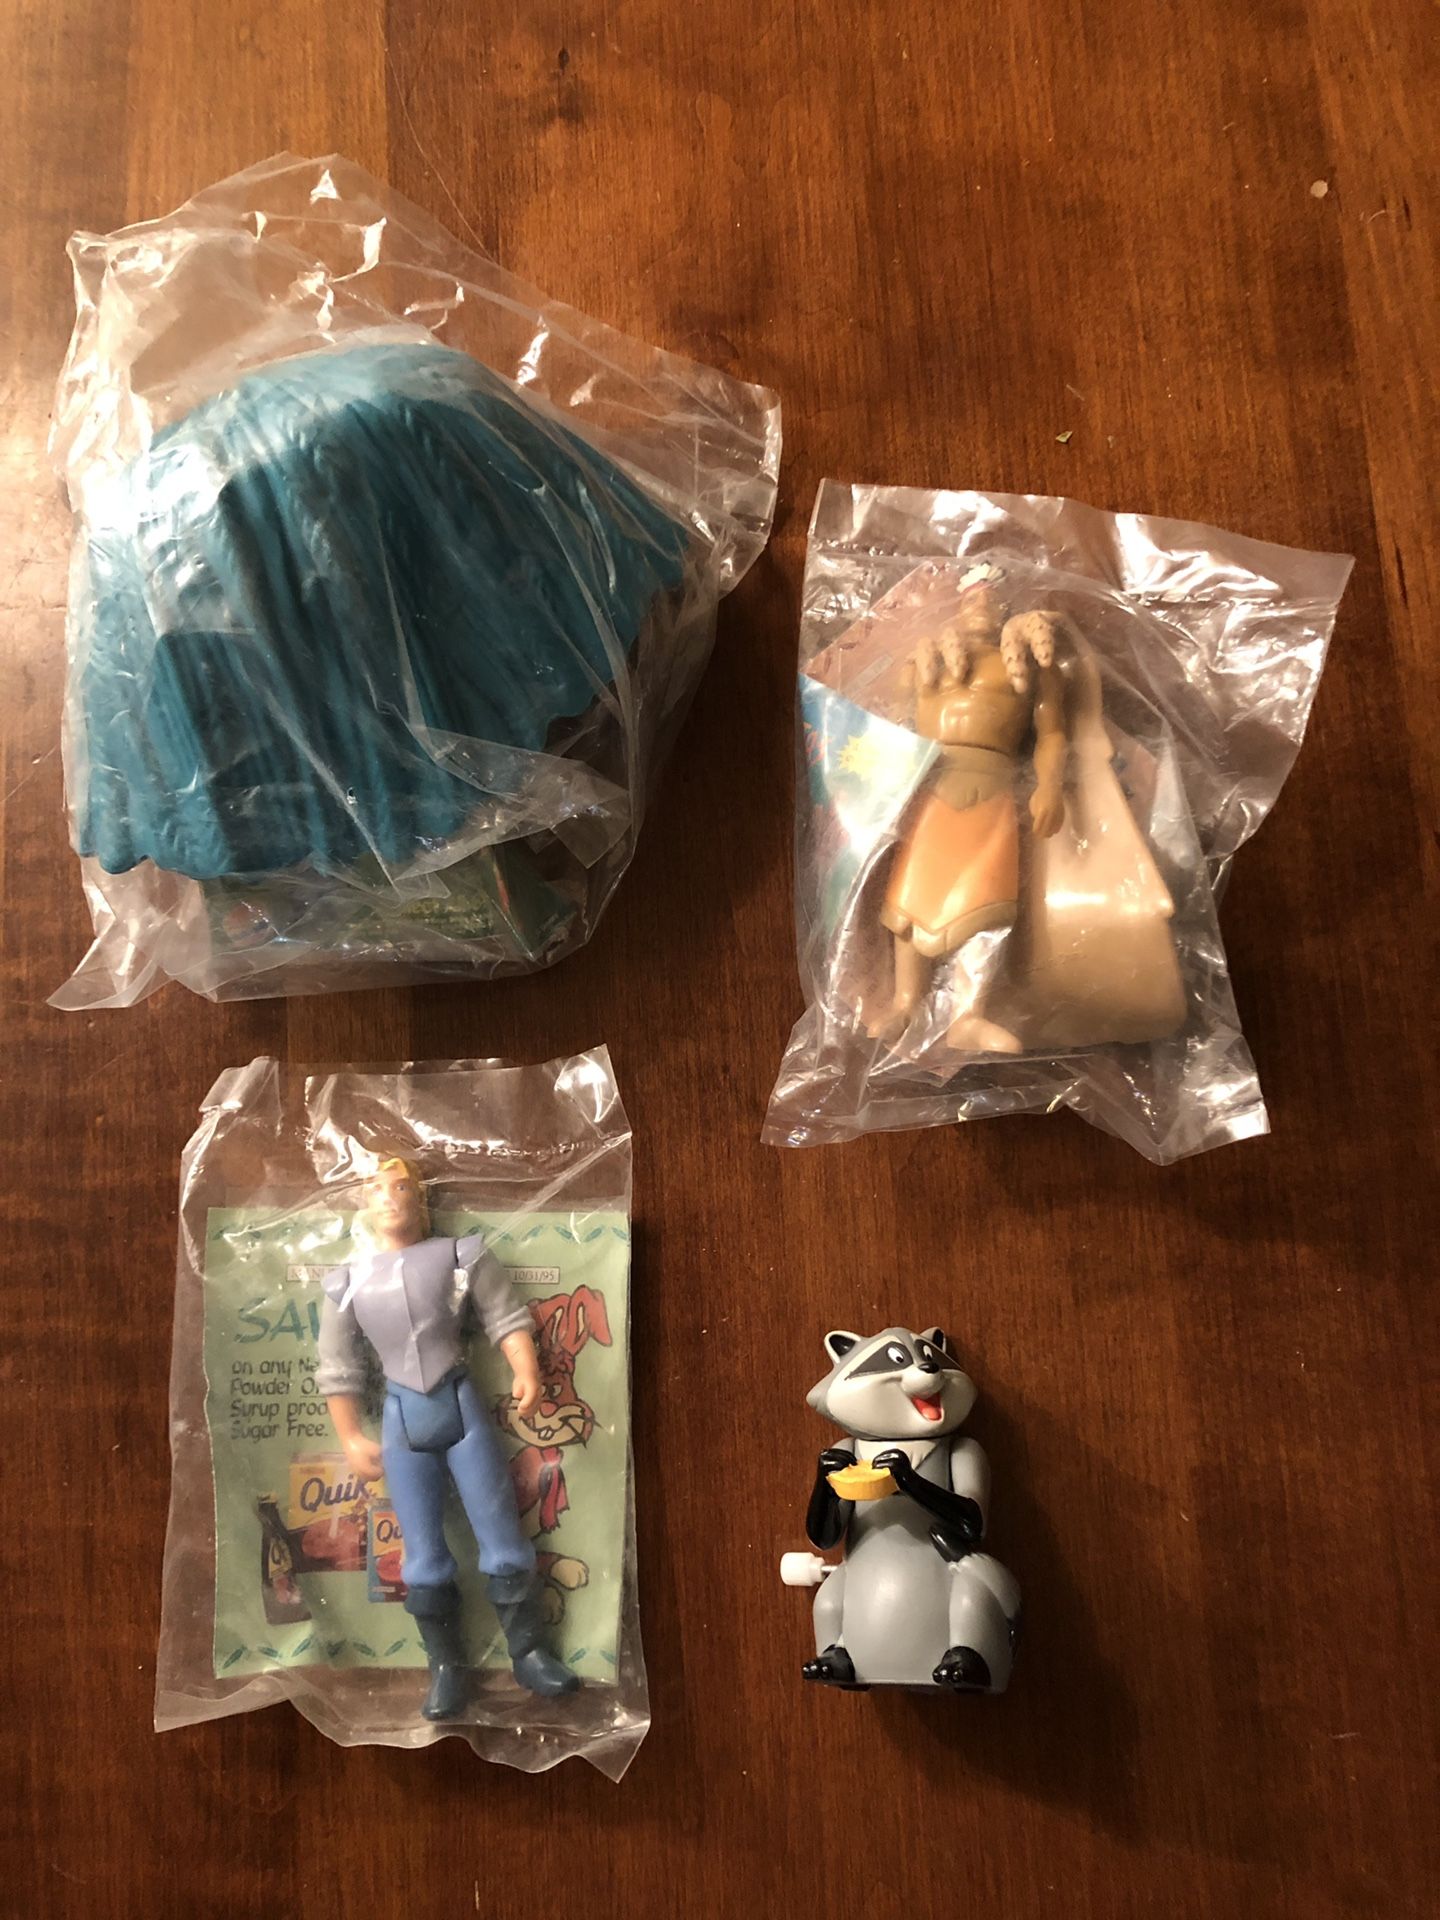 Lot of 4 vintage Burger King kids meal collectible toys- New unopened packages